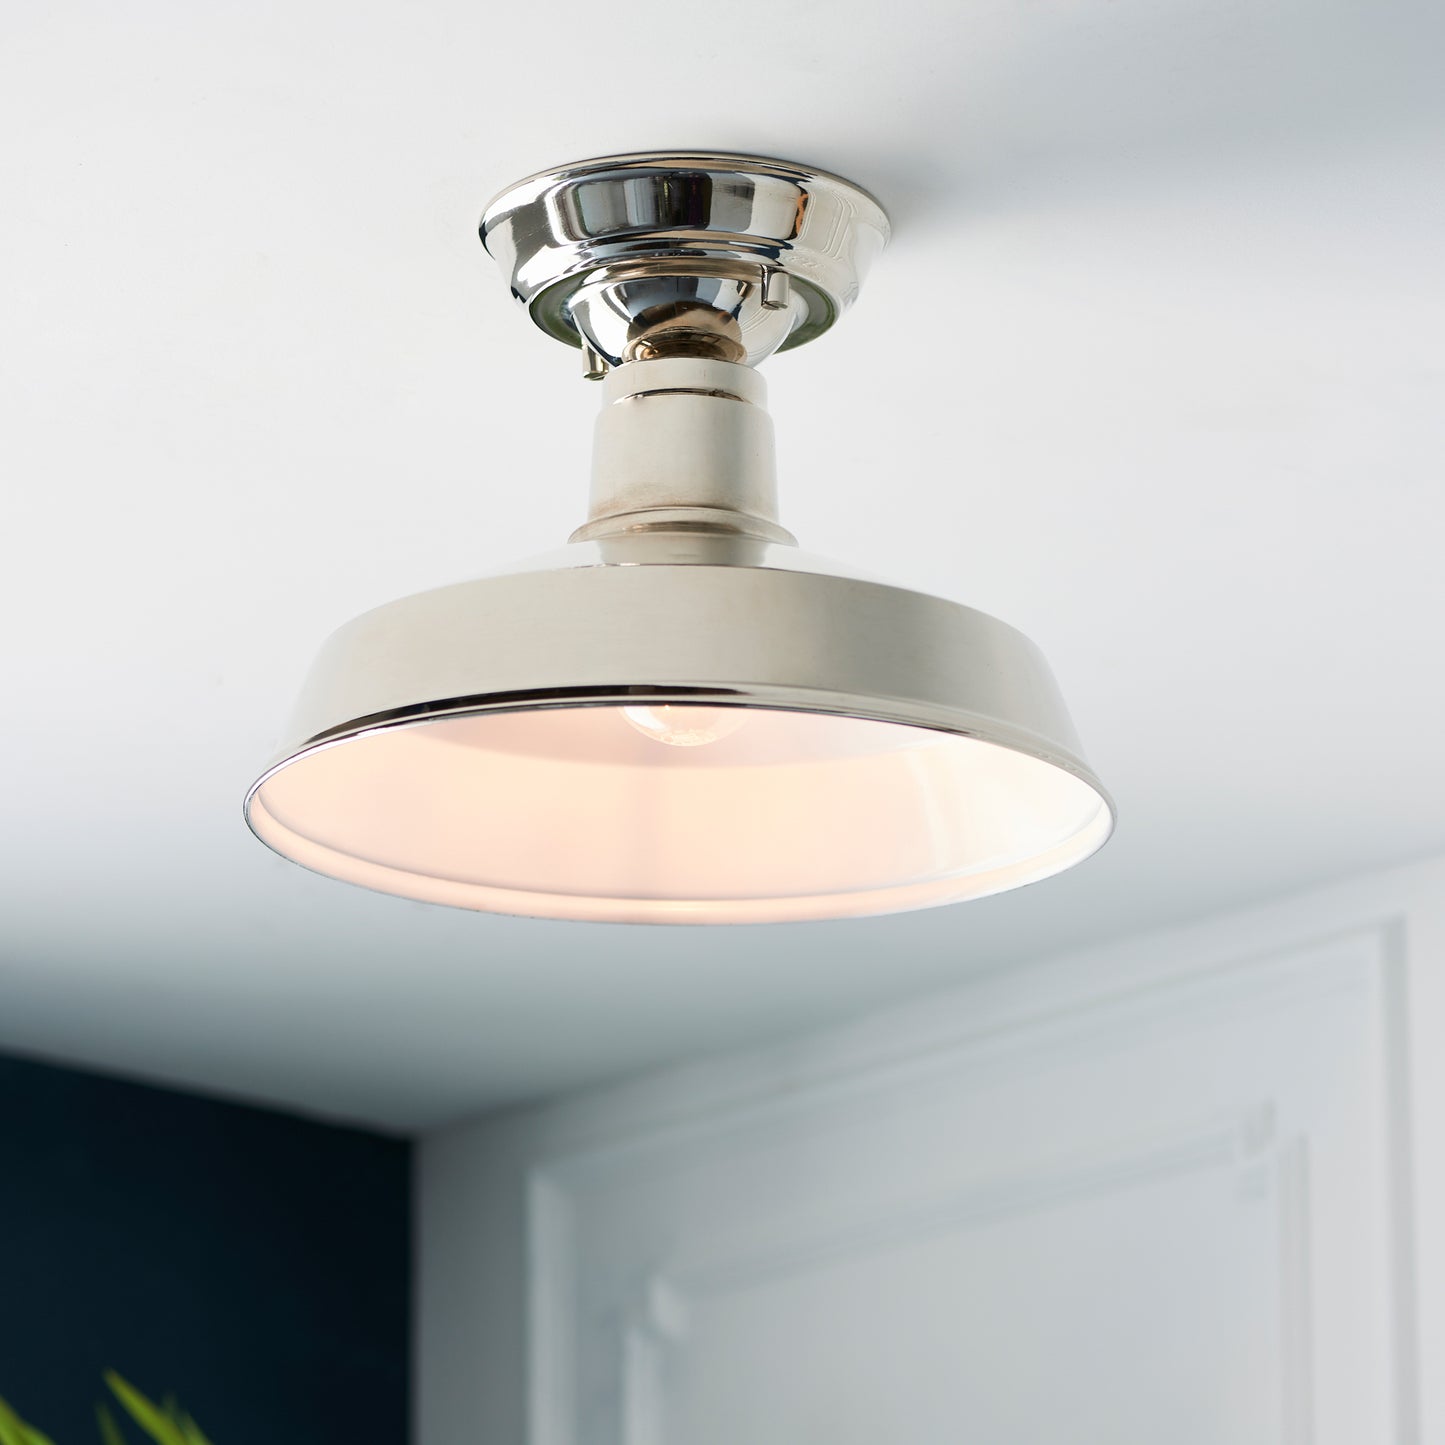 An interior decor featuring the Darton 1 Ceiling Light with a plant on it offered by Kikiathome.co.uk.